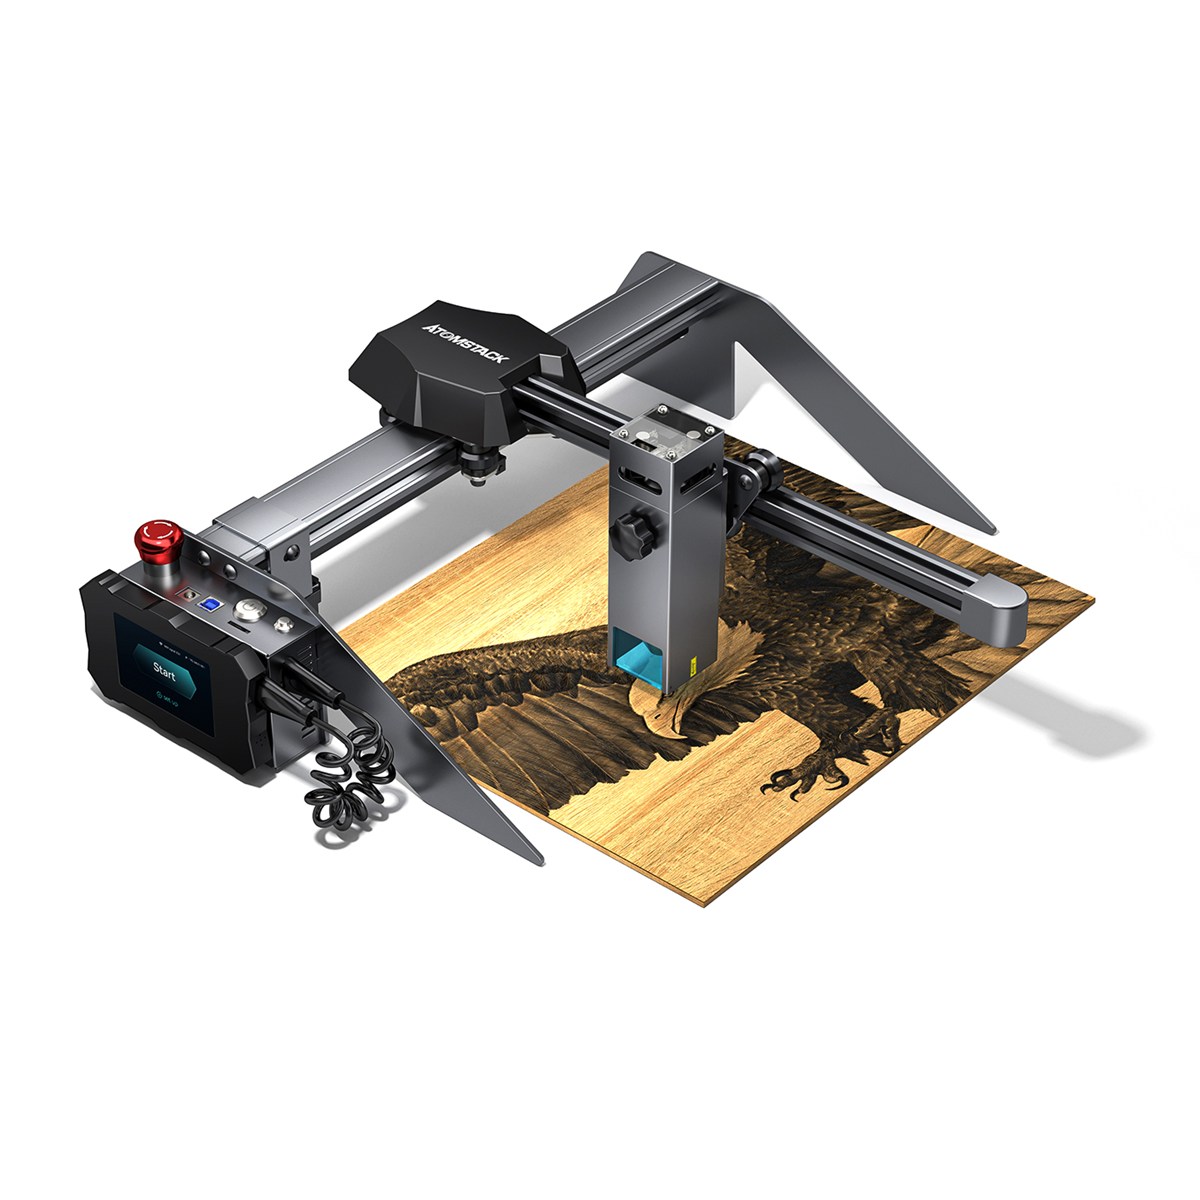 Find New ATOMSTACK P9 M50 Portable Dual Laser Engraving Cutting Machine 10W Output Power DIY Laser Engraver Cutter 304 Mirror Stainless Steel Engraving Support Offline Engraving 20mm Wood Cutting 15mm Acrylic Cutting for Sale on Gipsybee.com with cryptocurrencies